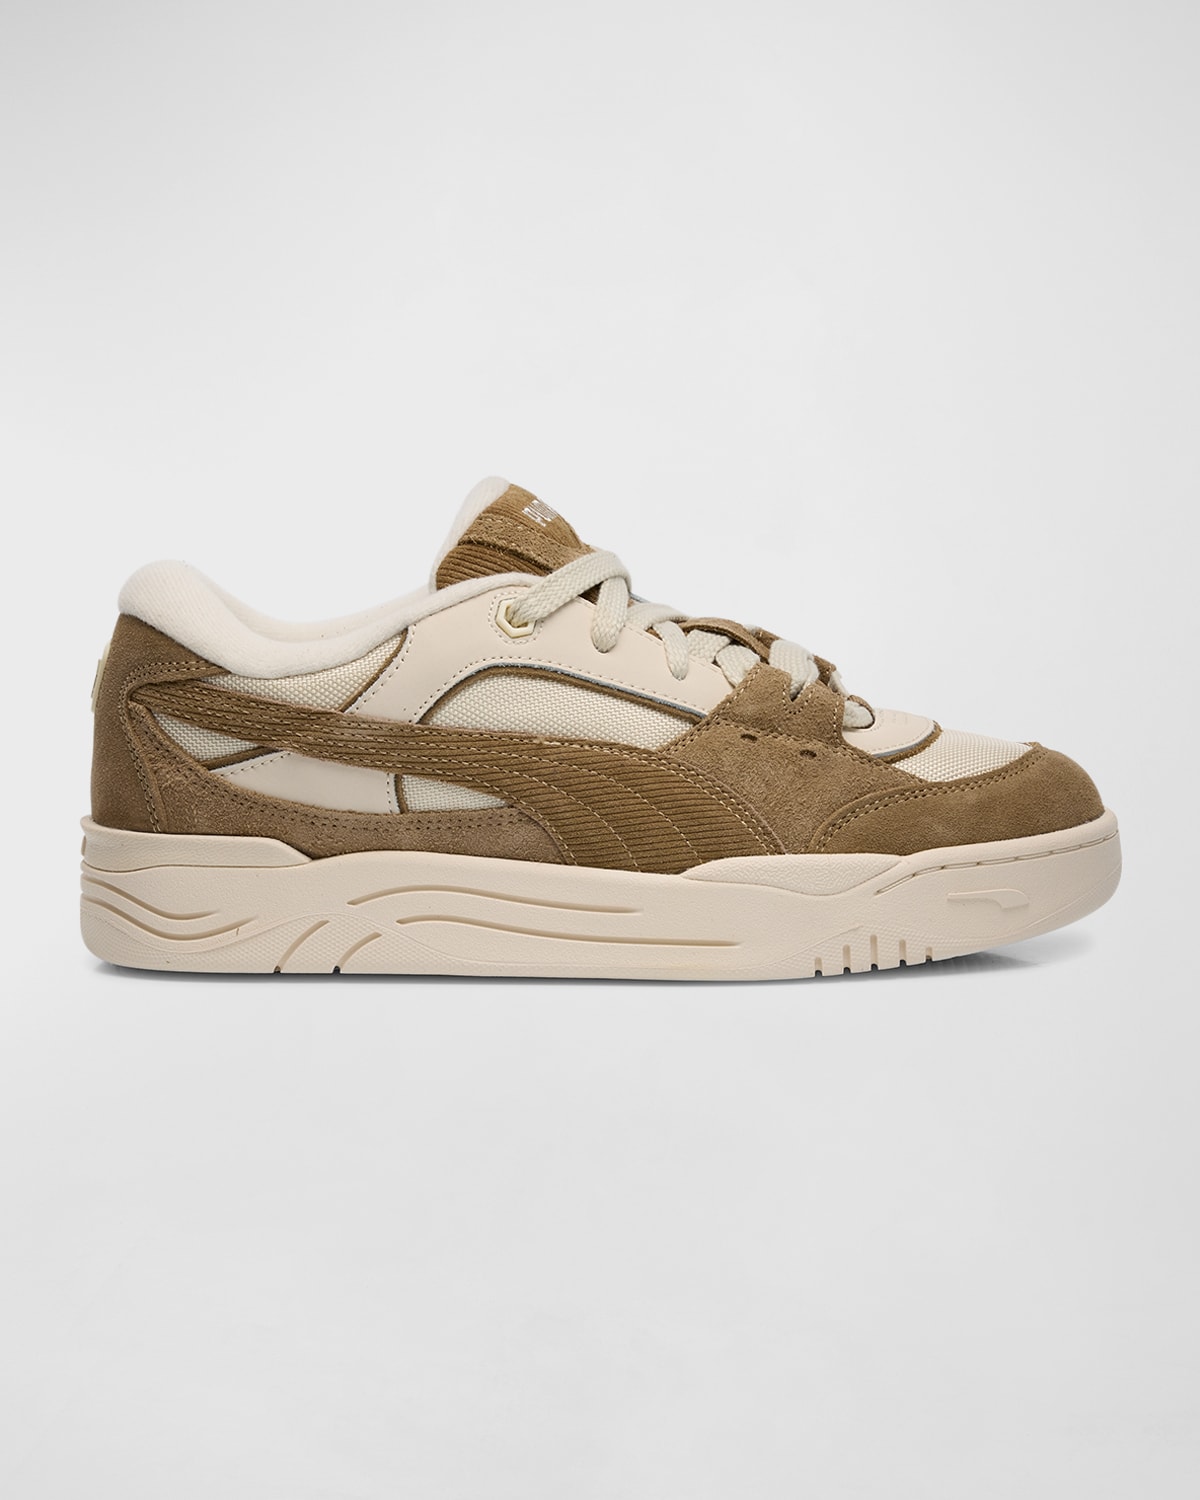 Puma -180 Courduroy Sneakers In White And Brown